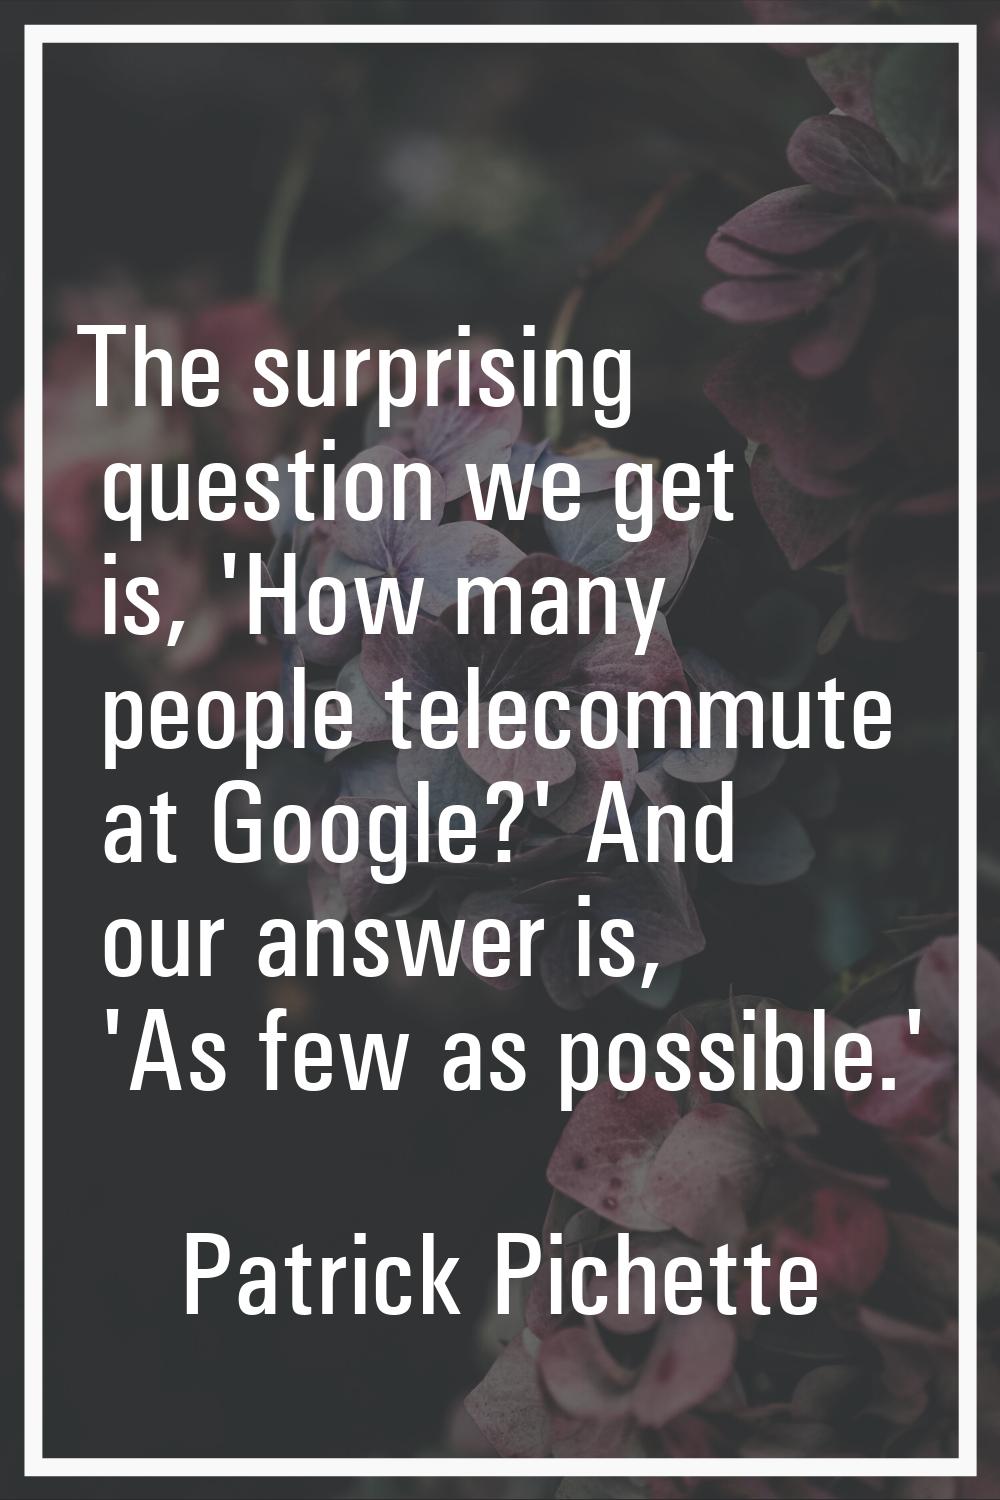 The surprising question we get is, 'How many people telecommute at Google?' And our answer is, 'As 